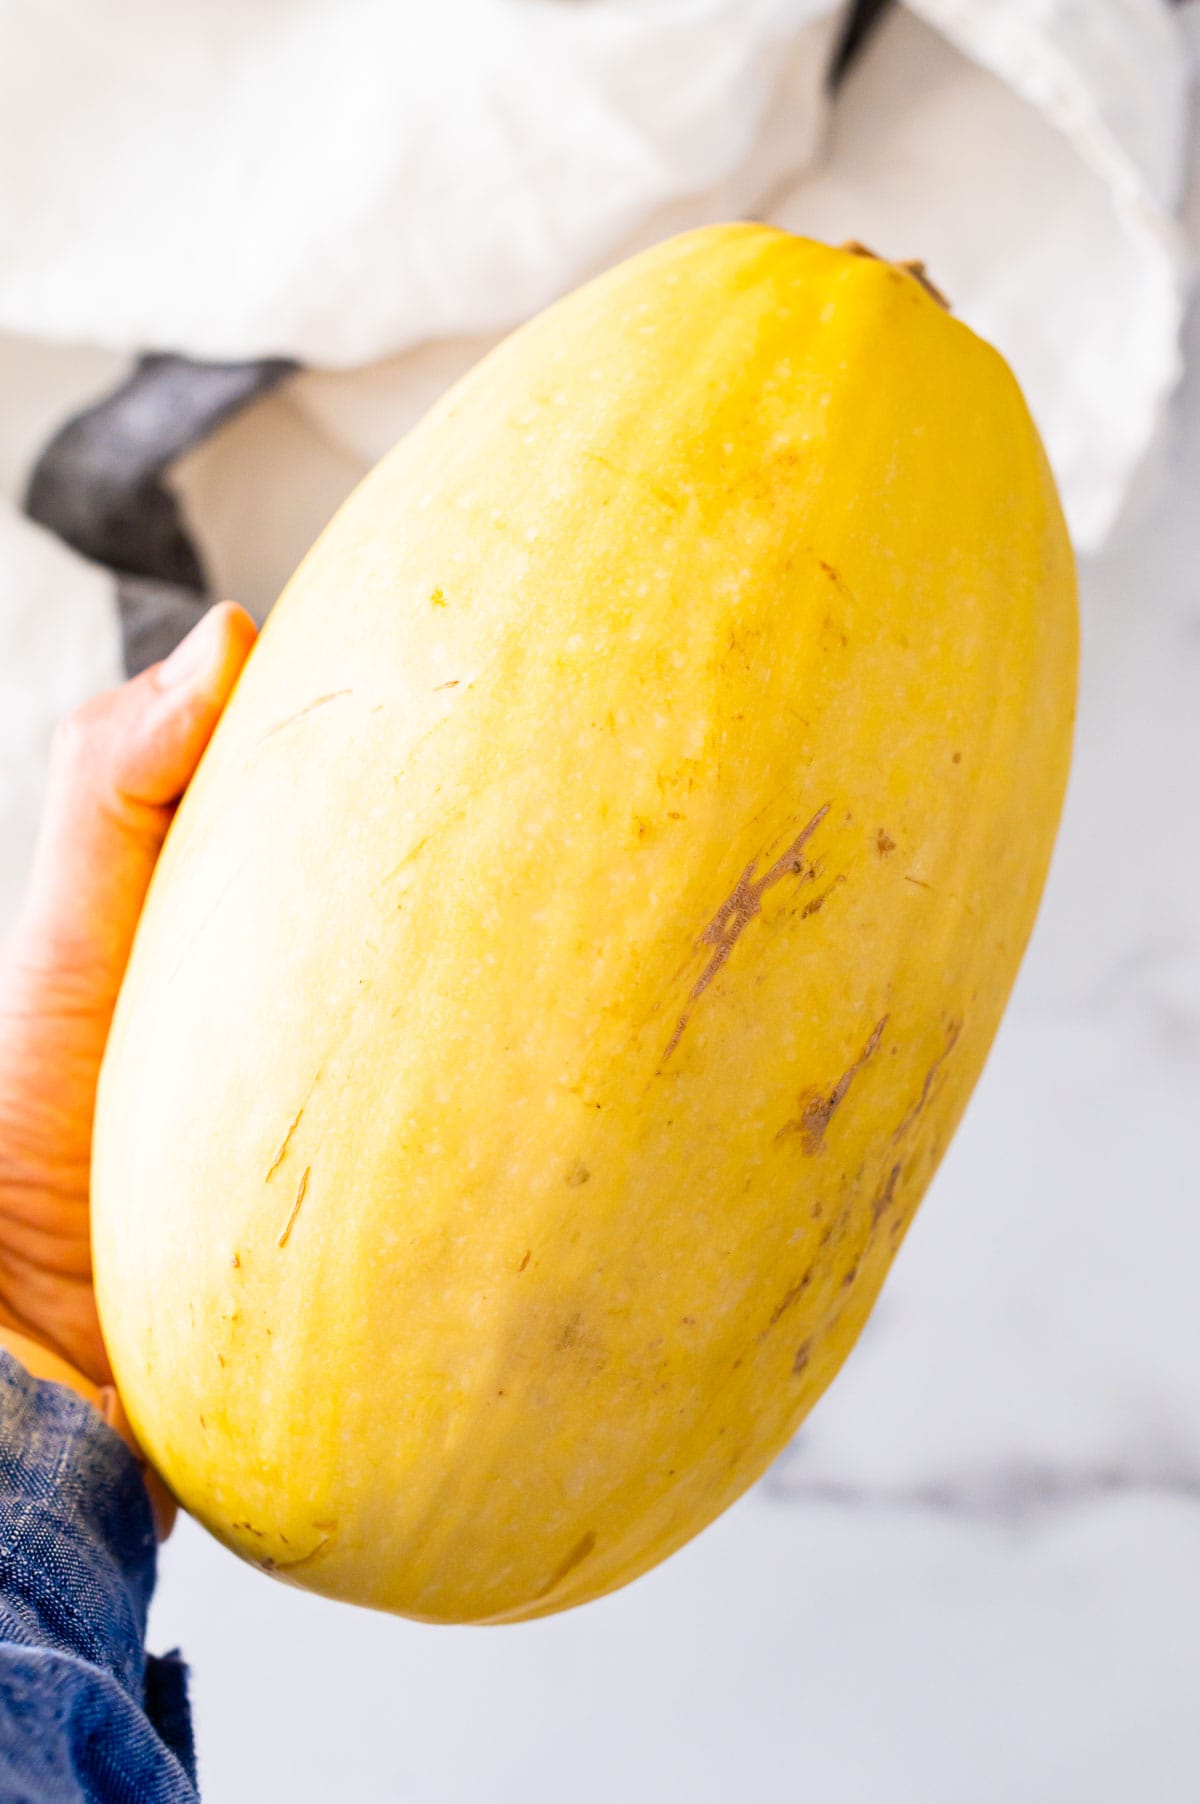 Person holding uncooked whole spaghetti squash in hand.